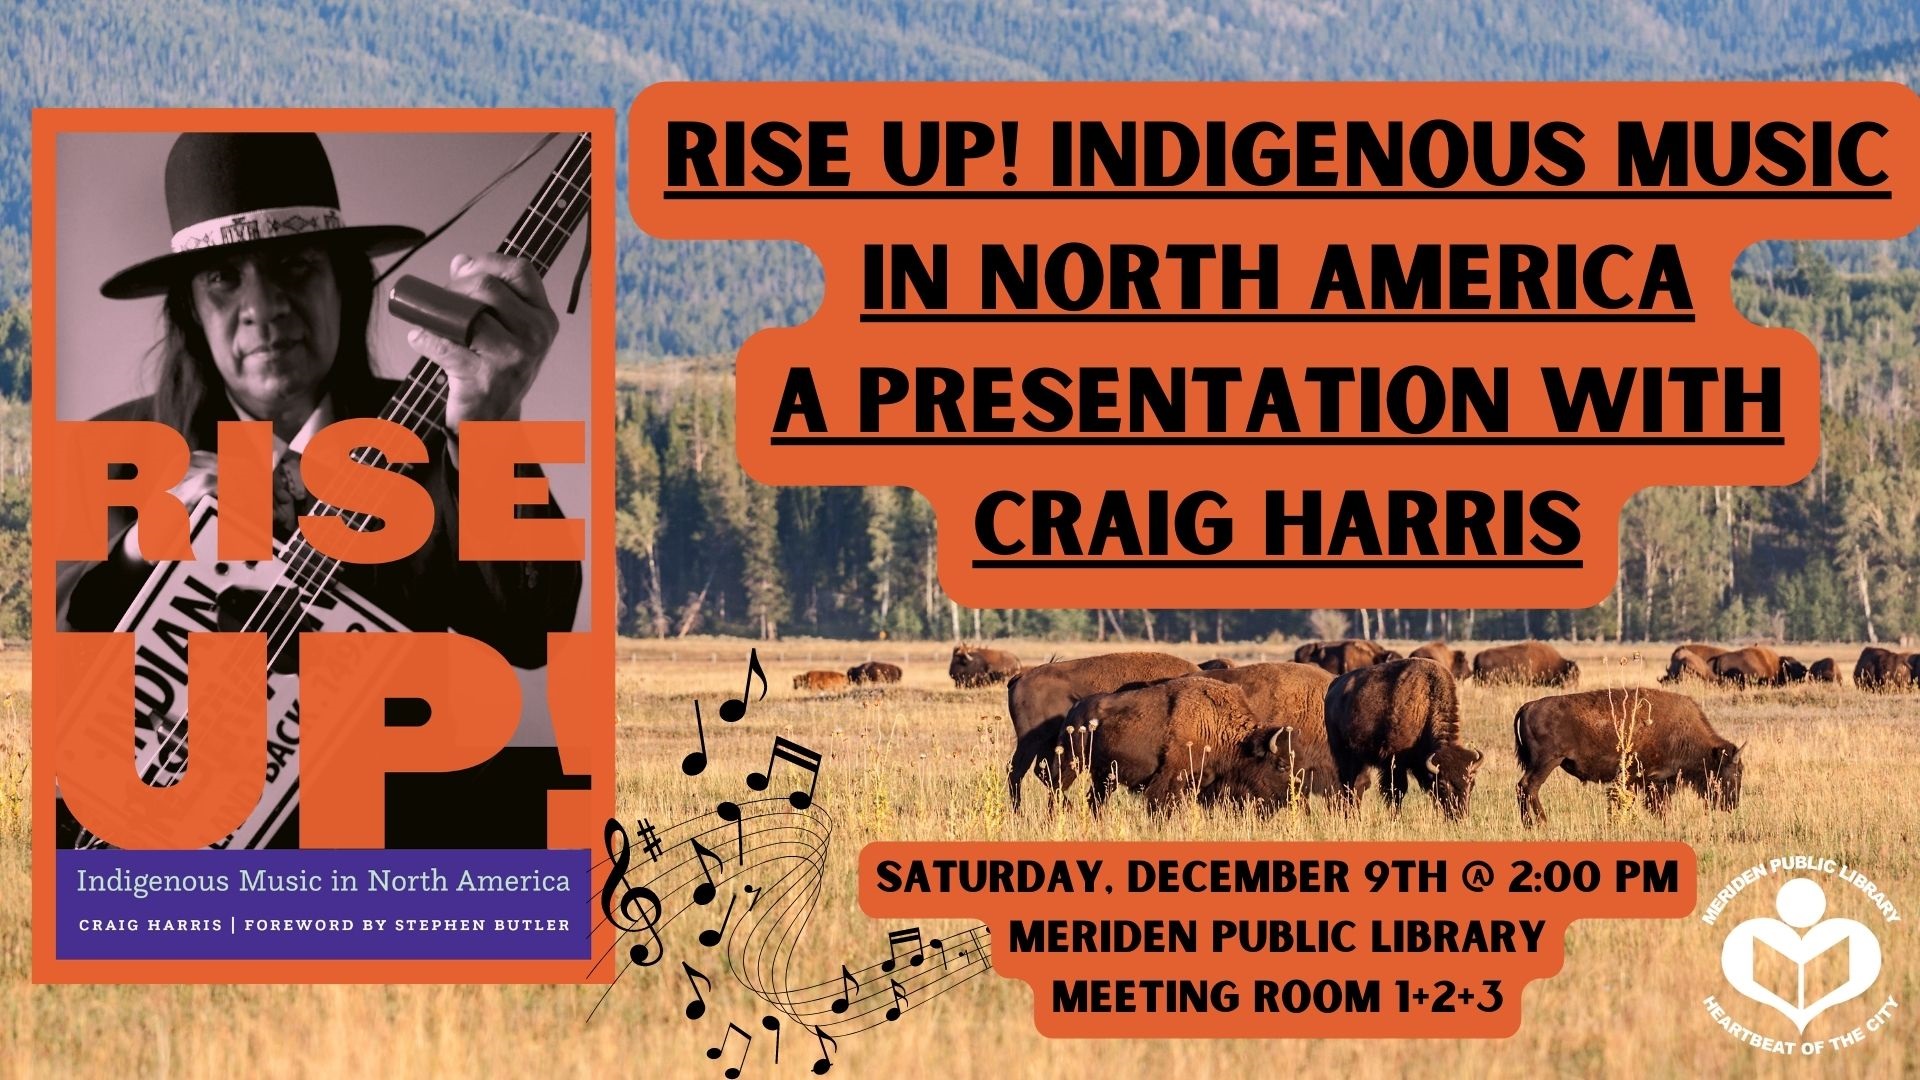 A picture of Craig Harris' book "Rise Up! Indigenous Music of North America" sits in front of the roaming buffalo and wild plains of North America